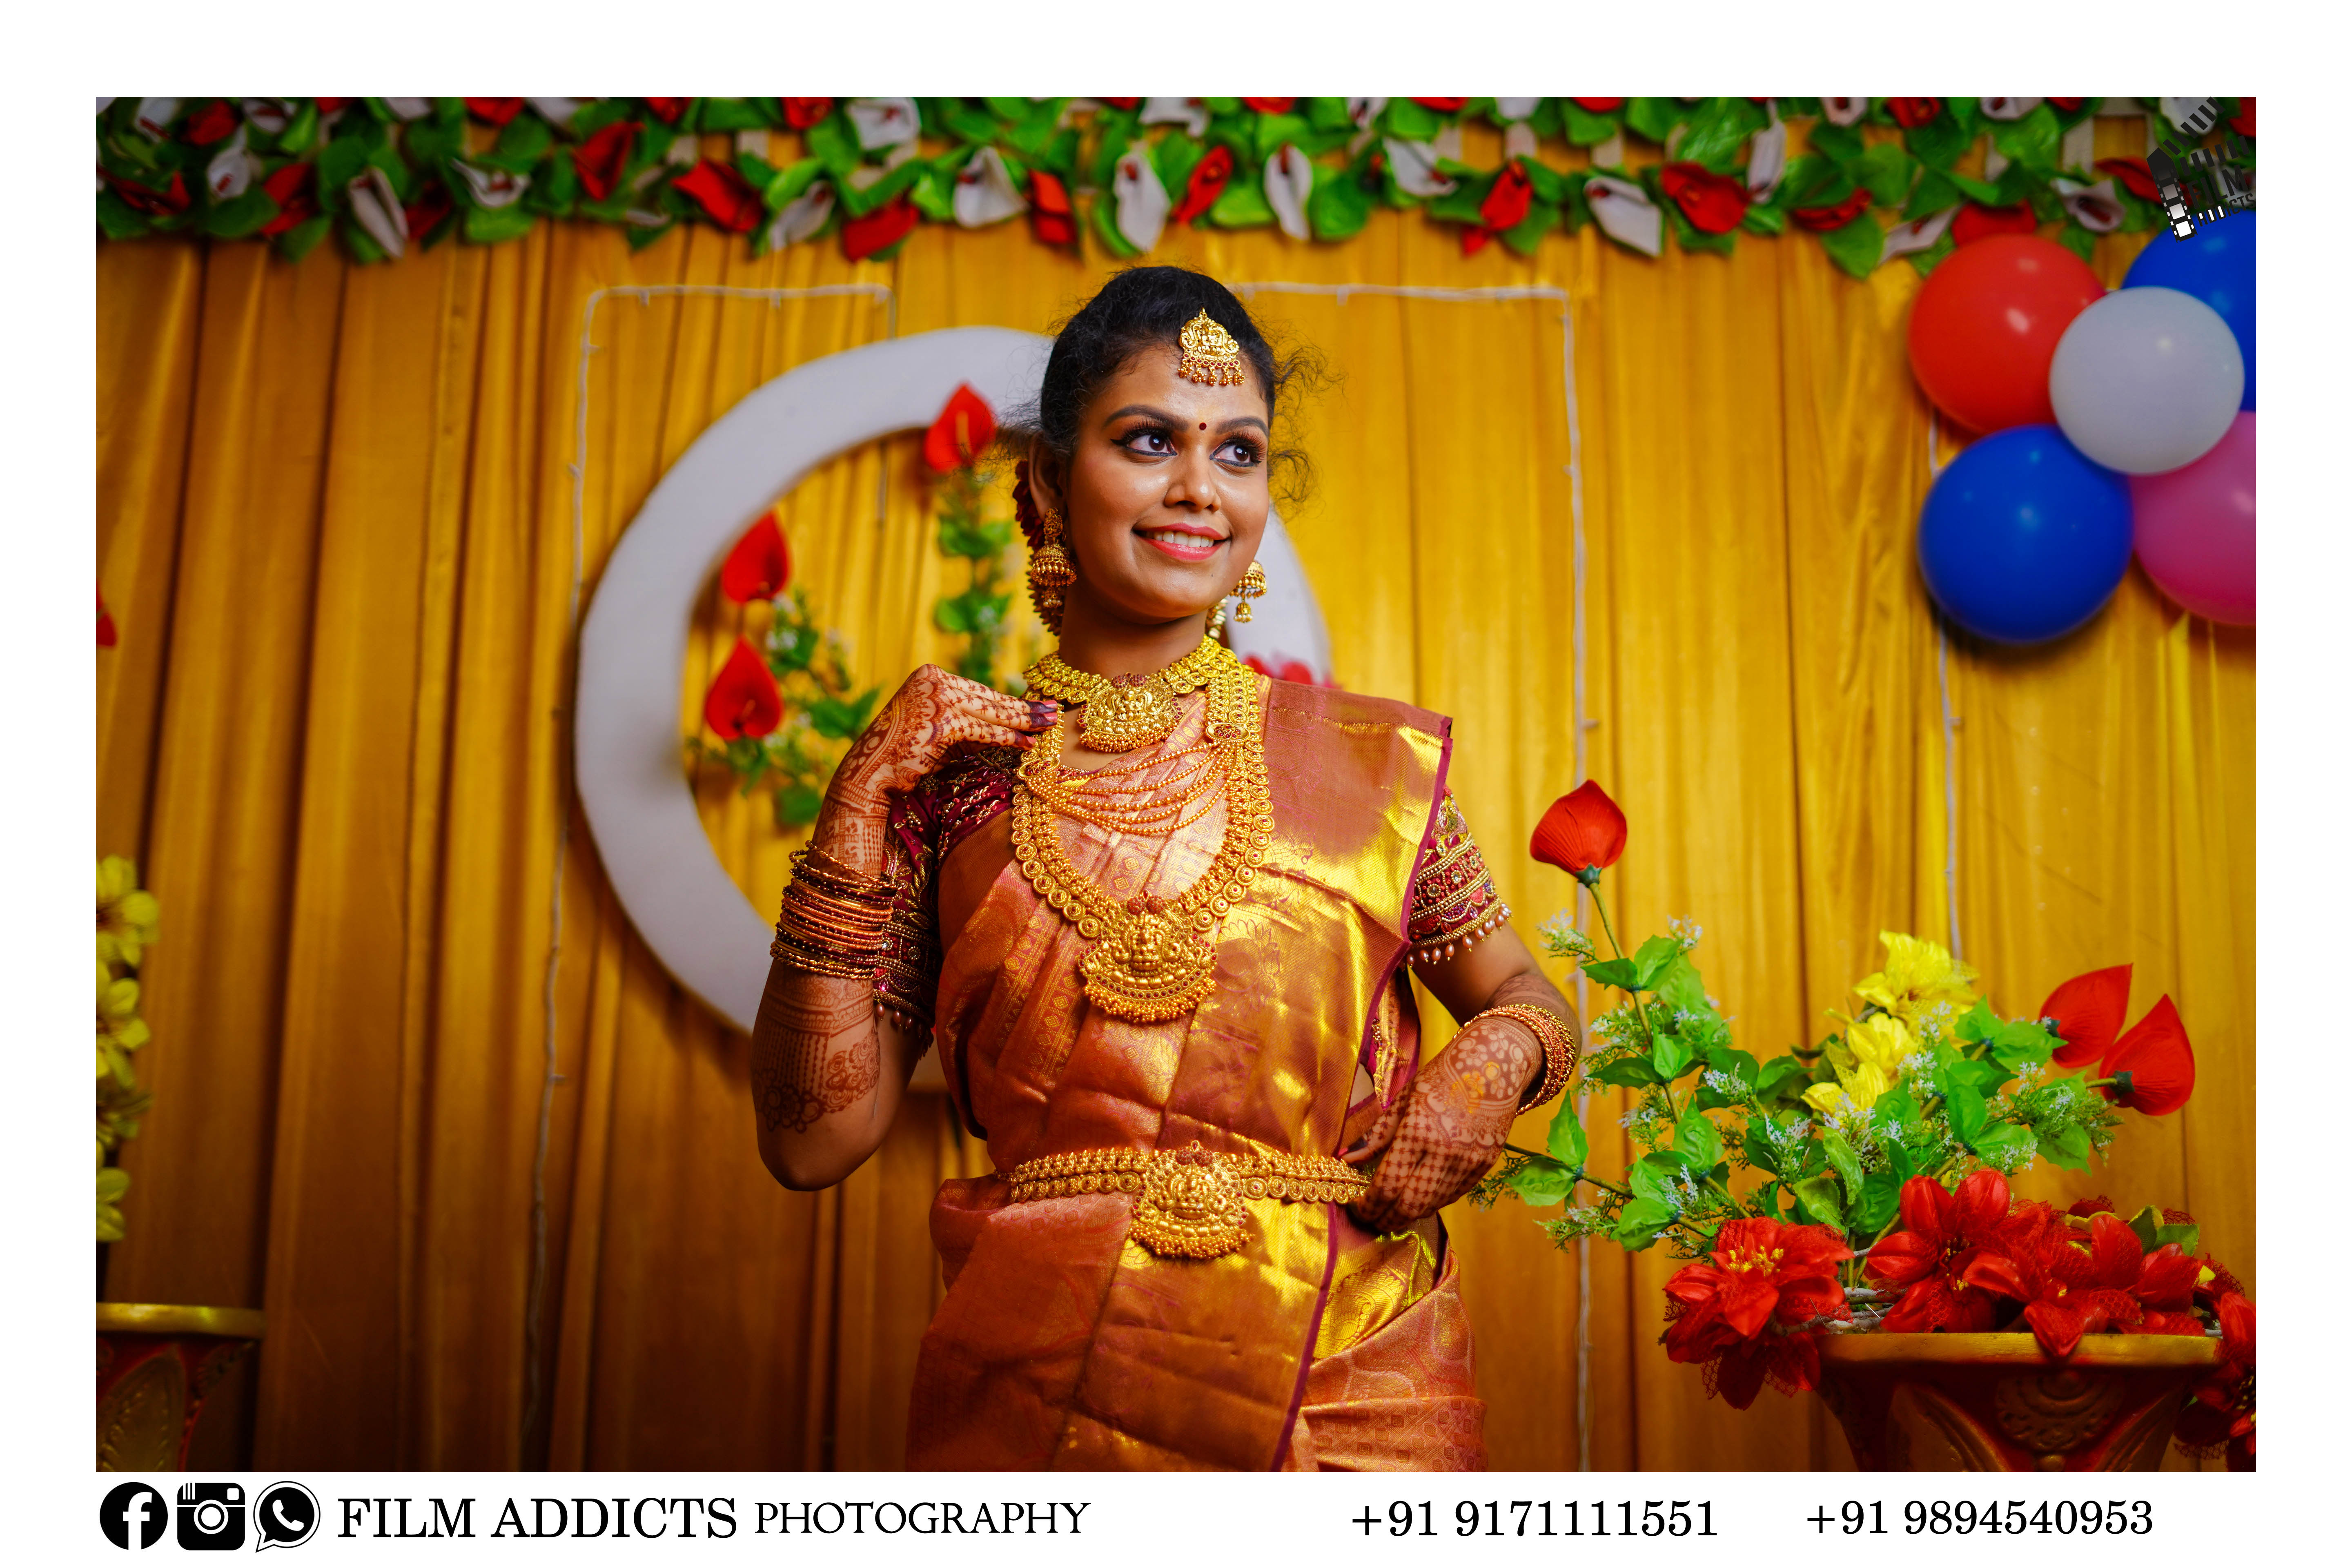 Best Puberty Photography in Sivaganga-FilmAddicts Photography, Best Candid photographers in sivagangai, Best wedding candid photographers in sivagangai, Best Photographers in sivagangai, Best Marraige photographers in sivagangai, Best wedding photography in sivagangai, Best wedding candid photography in sivagangai, Best Marraige photography in sivagangai, Best Photography in sivagangai, Best wedding video in sivagangai, Best wedding videography in sivagangai, Best Helicam operator in sivagangai, Best Drone Operator in sivagangai, Best wedding studio in sivagangai, Best proffesional photographers in sivagangai, No.1 Wedding Photographers in sivagangai, No.1 wedding photography in sivagangai, sivagangai wedding photographers, sivagangai wedding photography, sivagangai wedding Videos in sivagangai,Best Wedding photographers in Madurai, Best Candid photographers in Madurai, Best wedding candid photographers in Madurai, Best Photographers in Madurai,Best Marraige photographers in Madurai,Best wedding photography in Madurai, Best wedding candid photography in Madurai, Best Marraige photography in Madurai, Best Photography in Madurai, Best wedding video in Madurai, Best wedding videography in Madurai, Best Helicam operator in Madurai, Best Drone Operator in Madurai, Best wedding studio in Madurai, Best proffesional photographers in Madurai, No.1 Wedding Photographers in Madurai, No.1 wedding photography in Madurai, Madurai wedding photographers, Madurai wedding photography, Madurai wedding Videos in Madurai, Best Wedding photographers in TamilNadu.